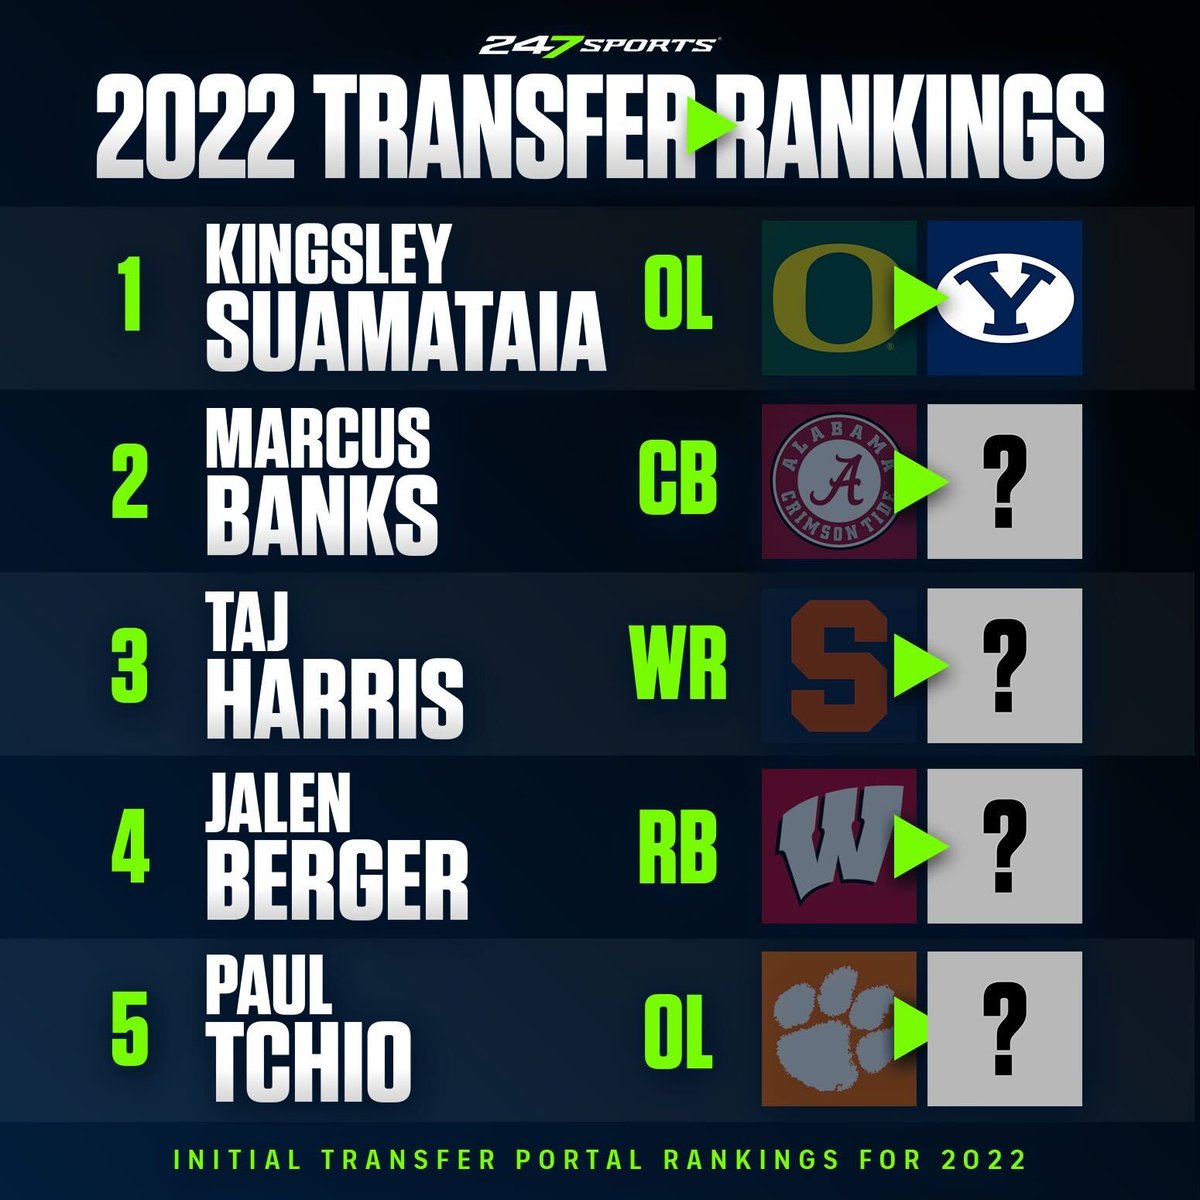 RT @247SportsPortal: Did you see @247Sports' Top 25 transfer rankings? Check it out here!

https://t.co/qSRcoLkmts https://t.co/utgfzKRdYT